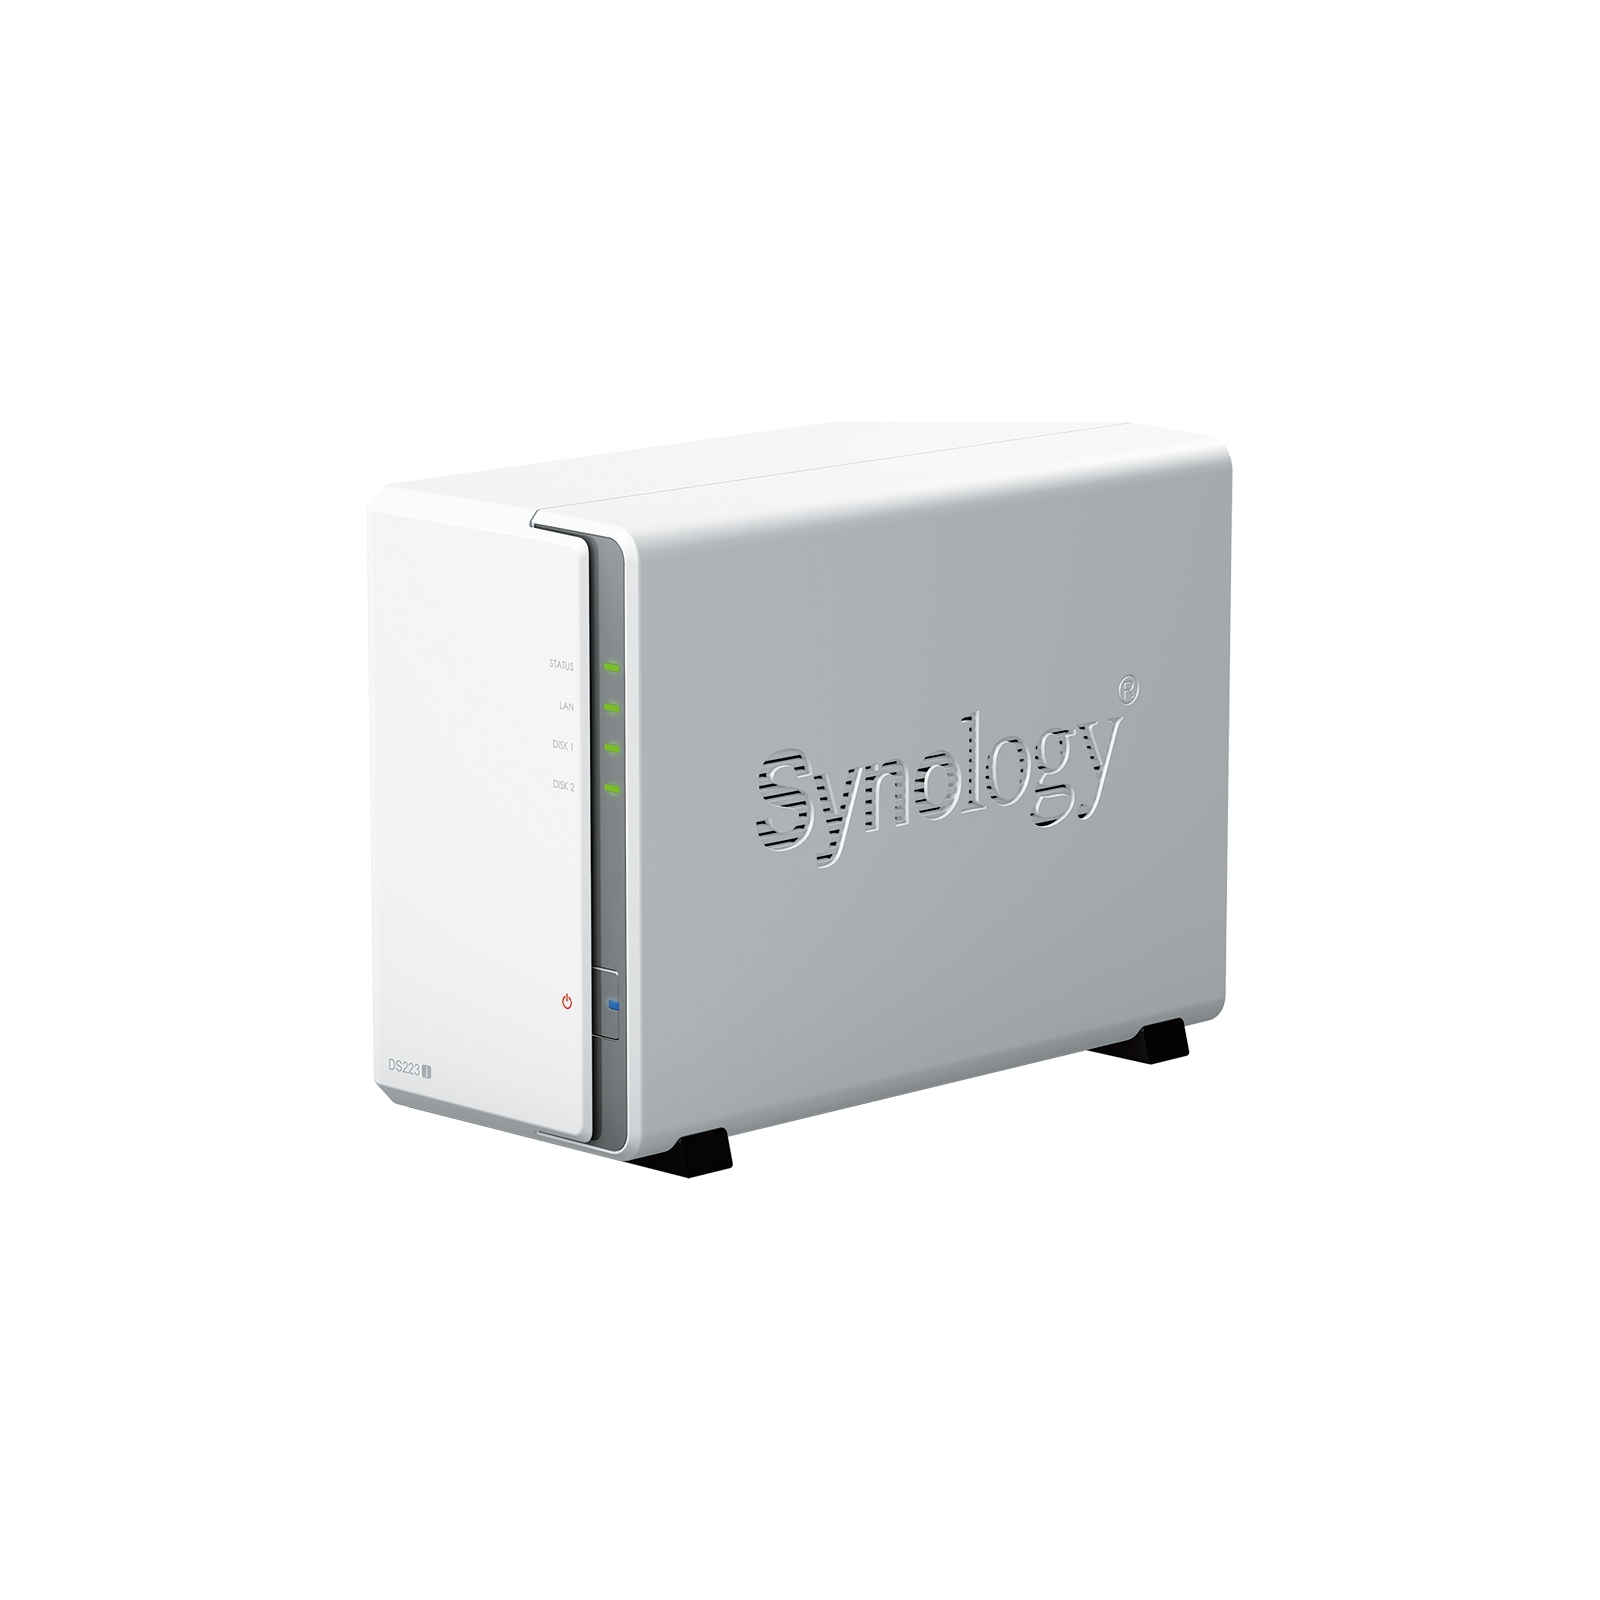 NAS Synology DS223J